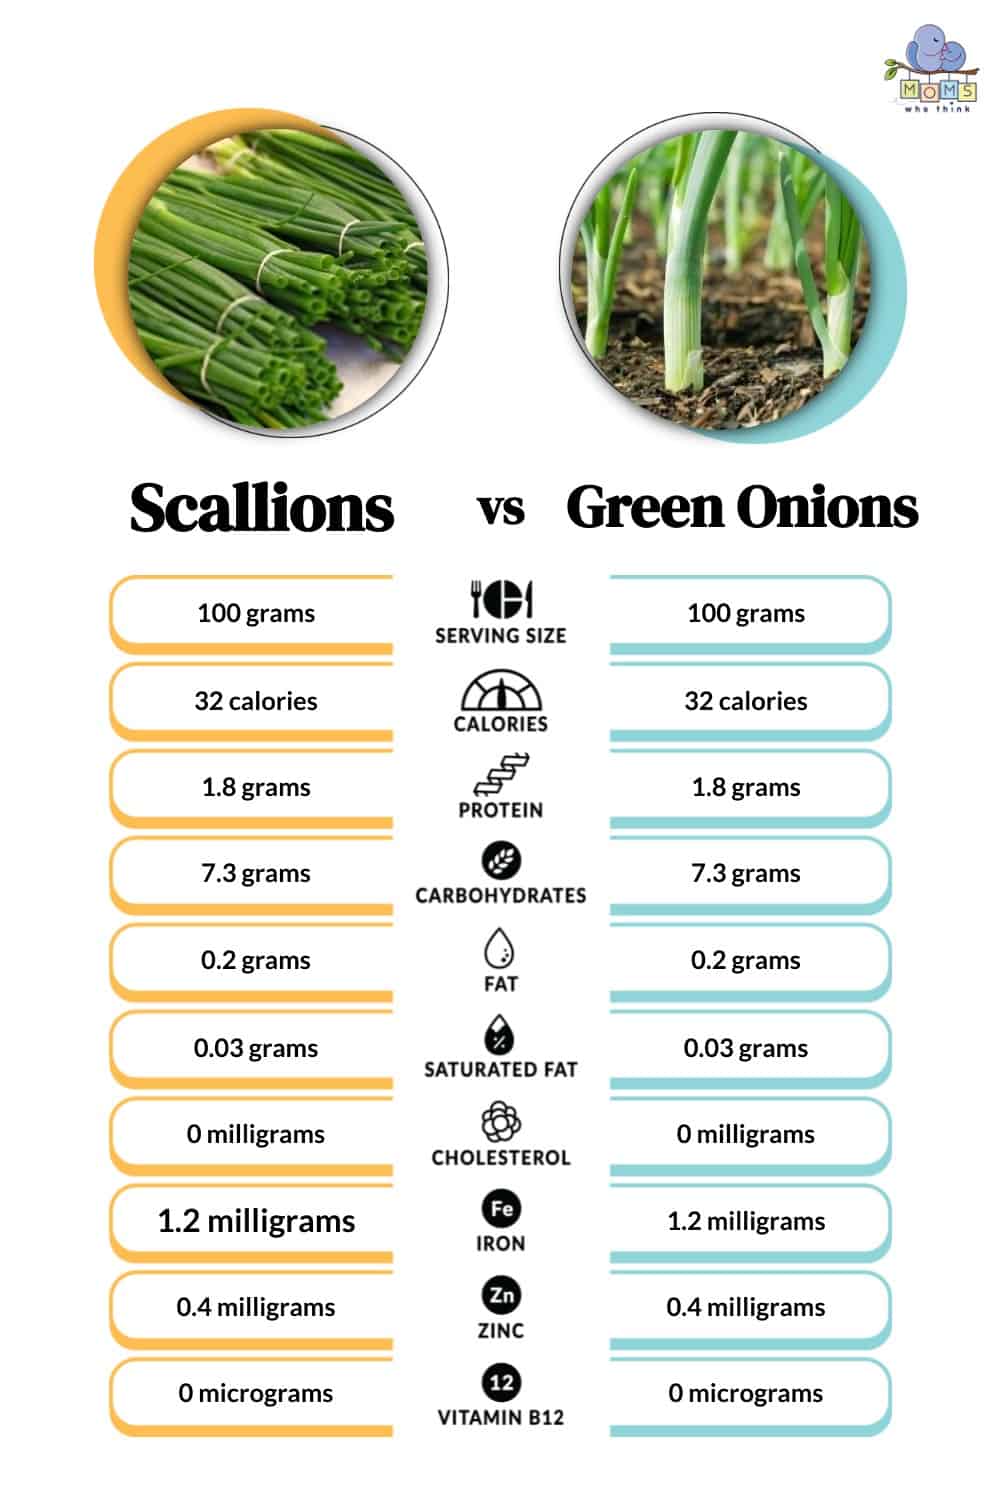 Scallions vs Green Onions Nutritional Facts